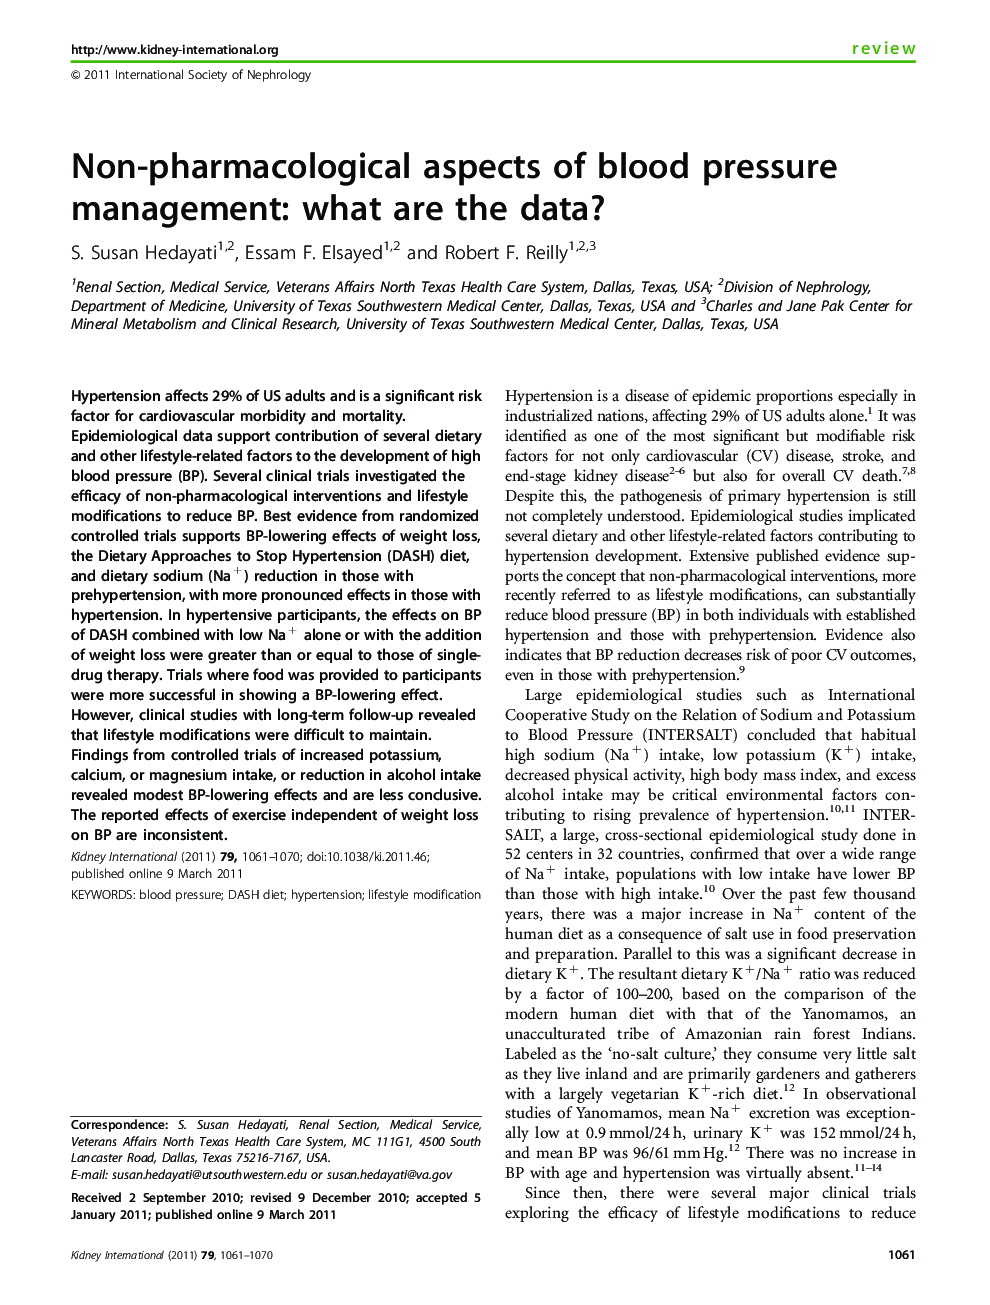 Non-pharmacological aspects of blood pressure management: what are the data?